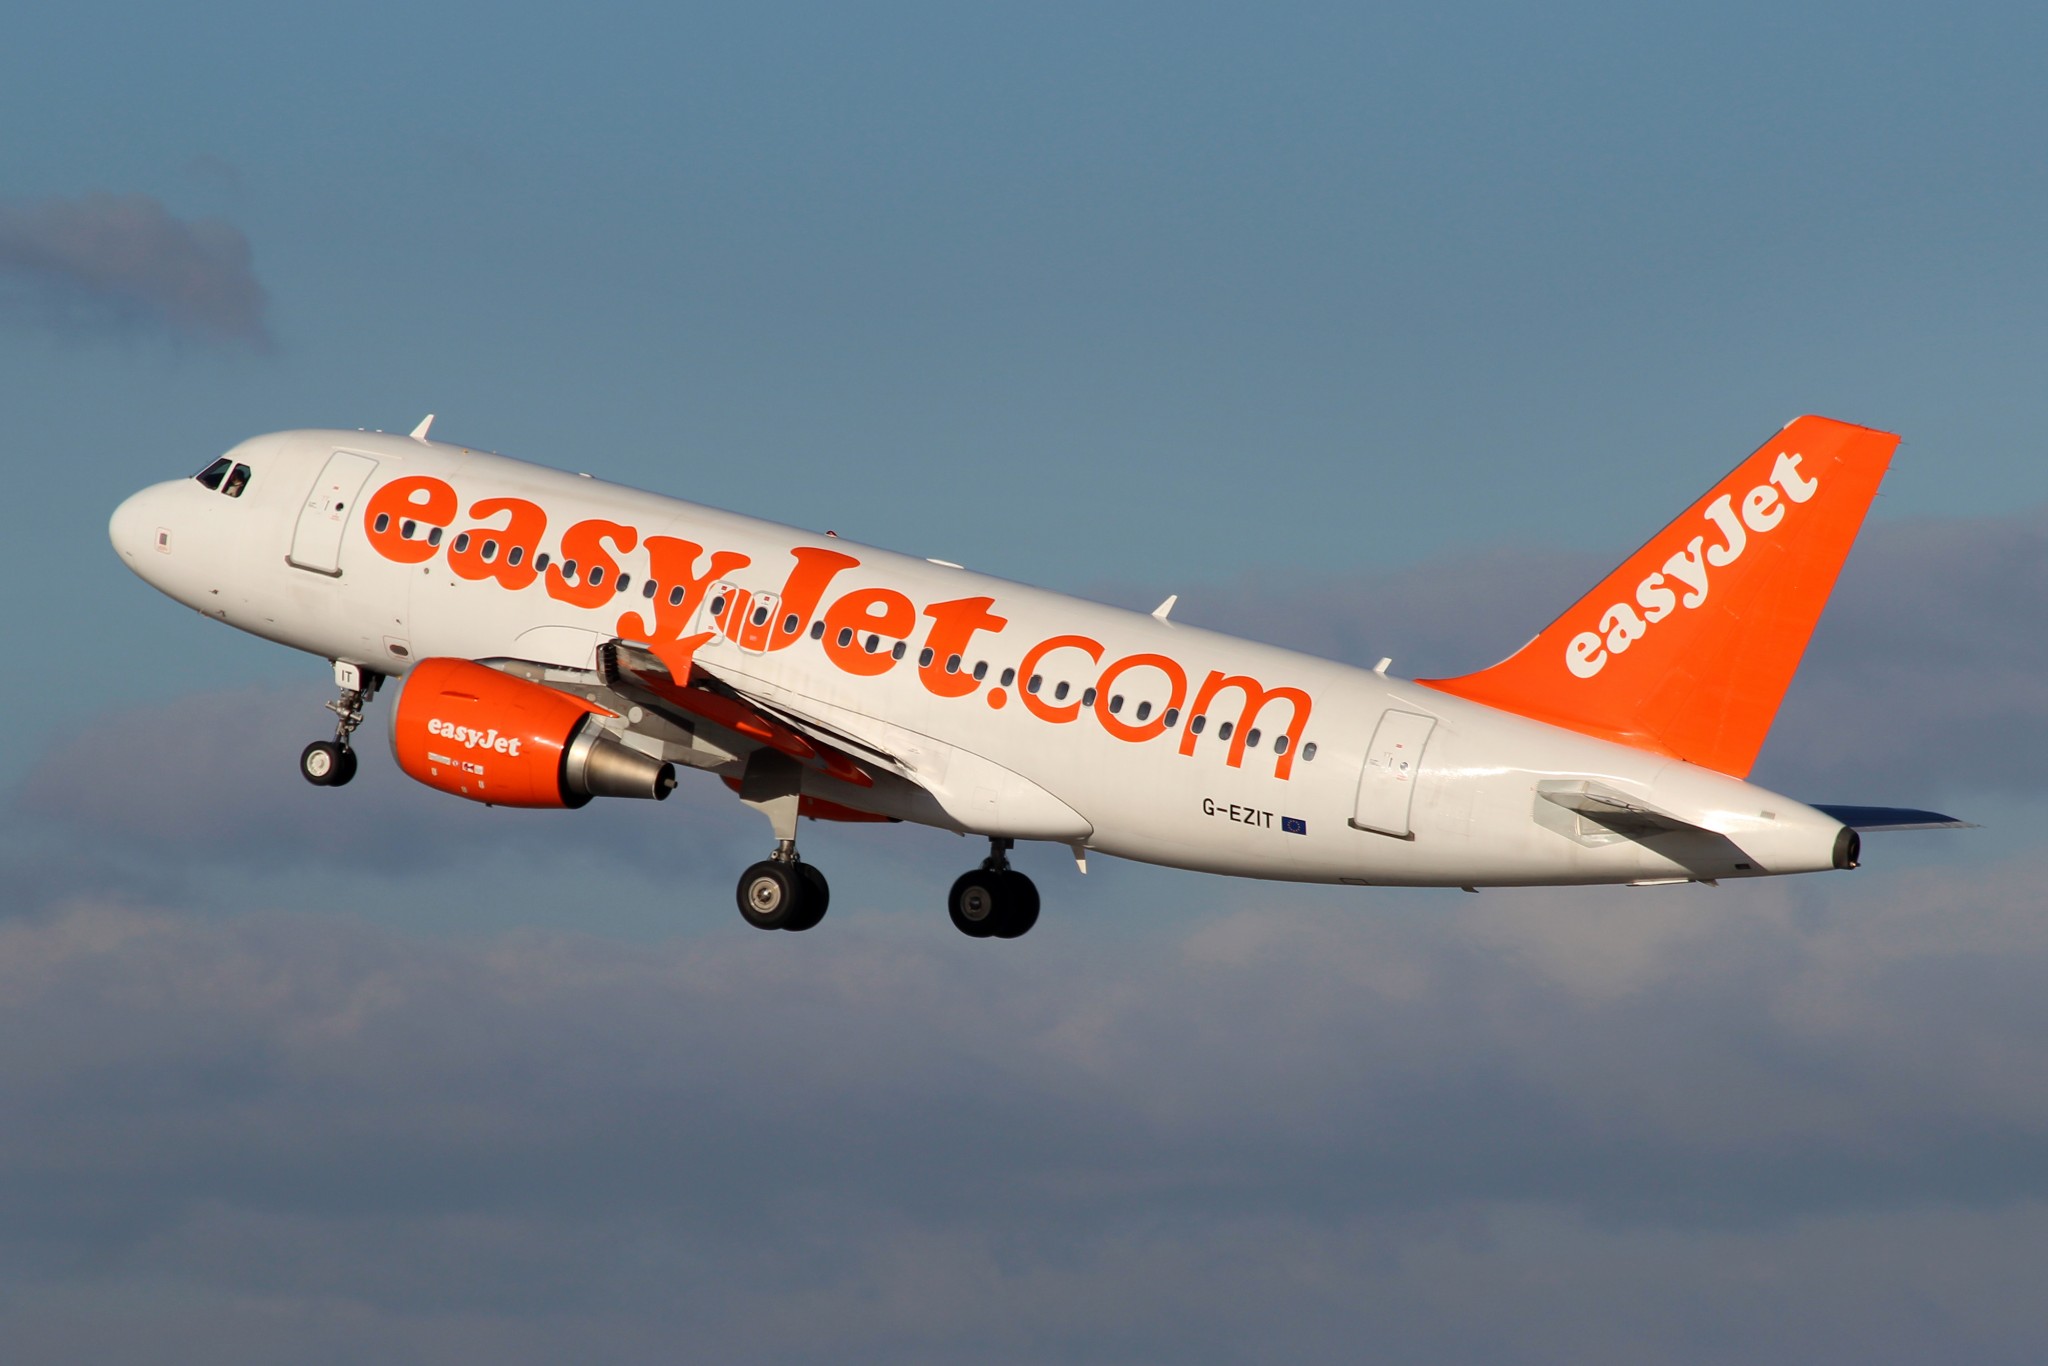 EasyJet reports a solid first quarter